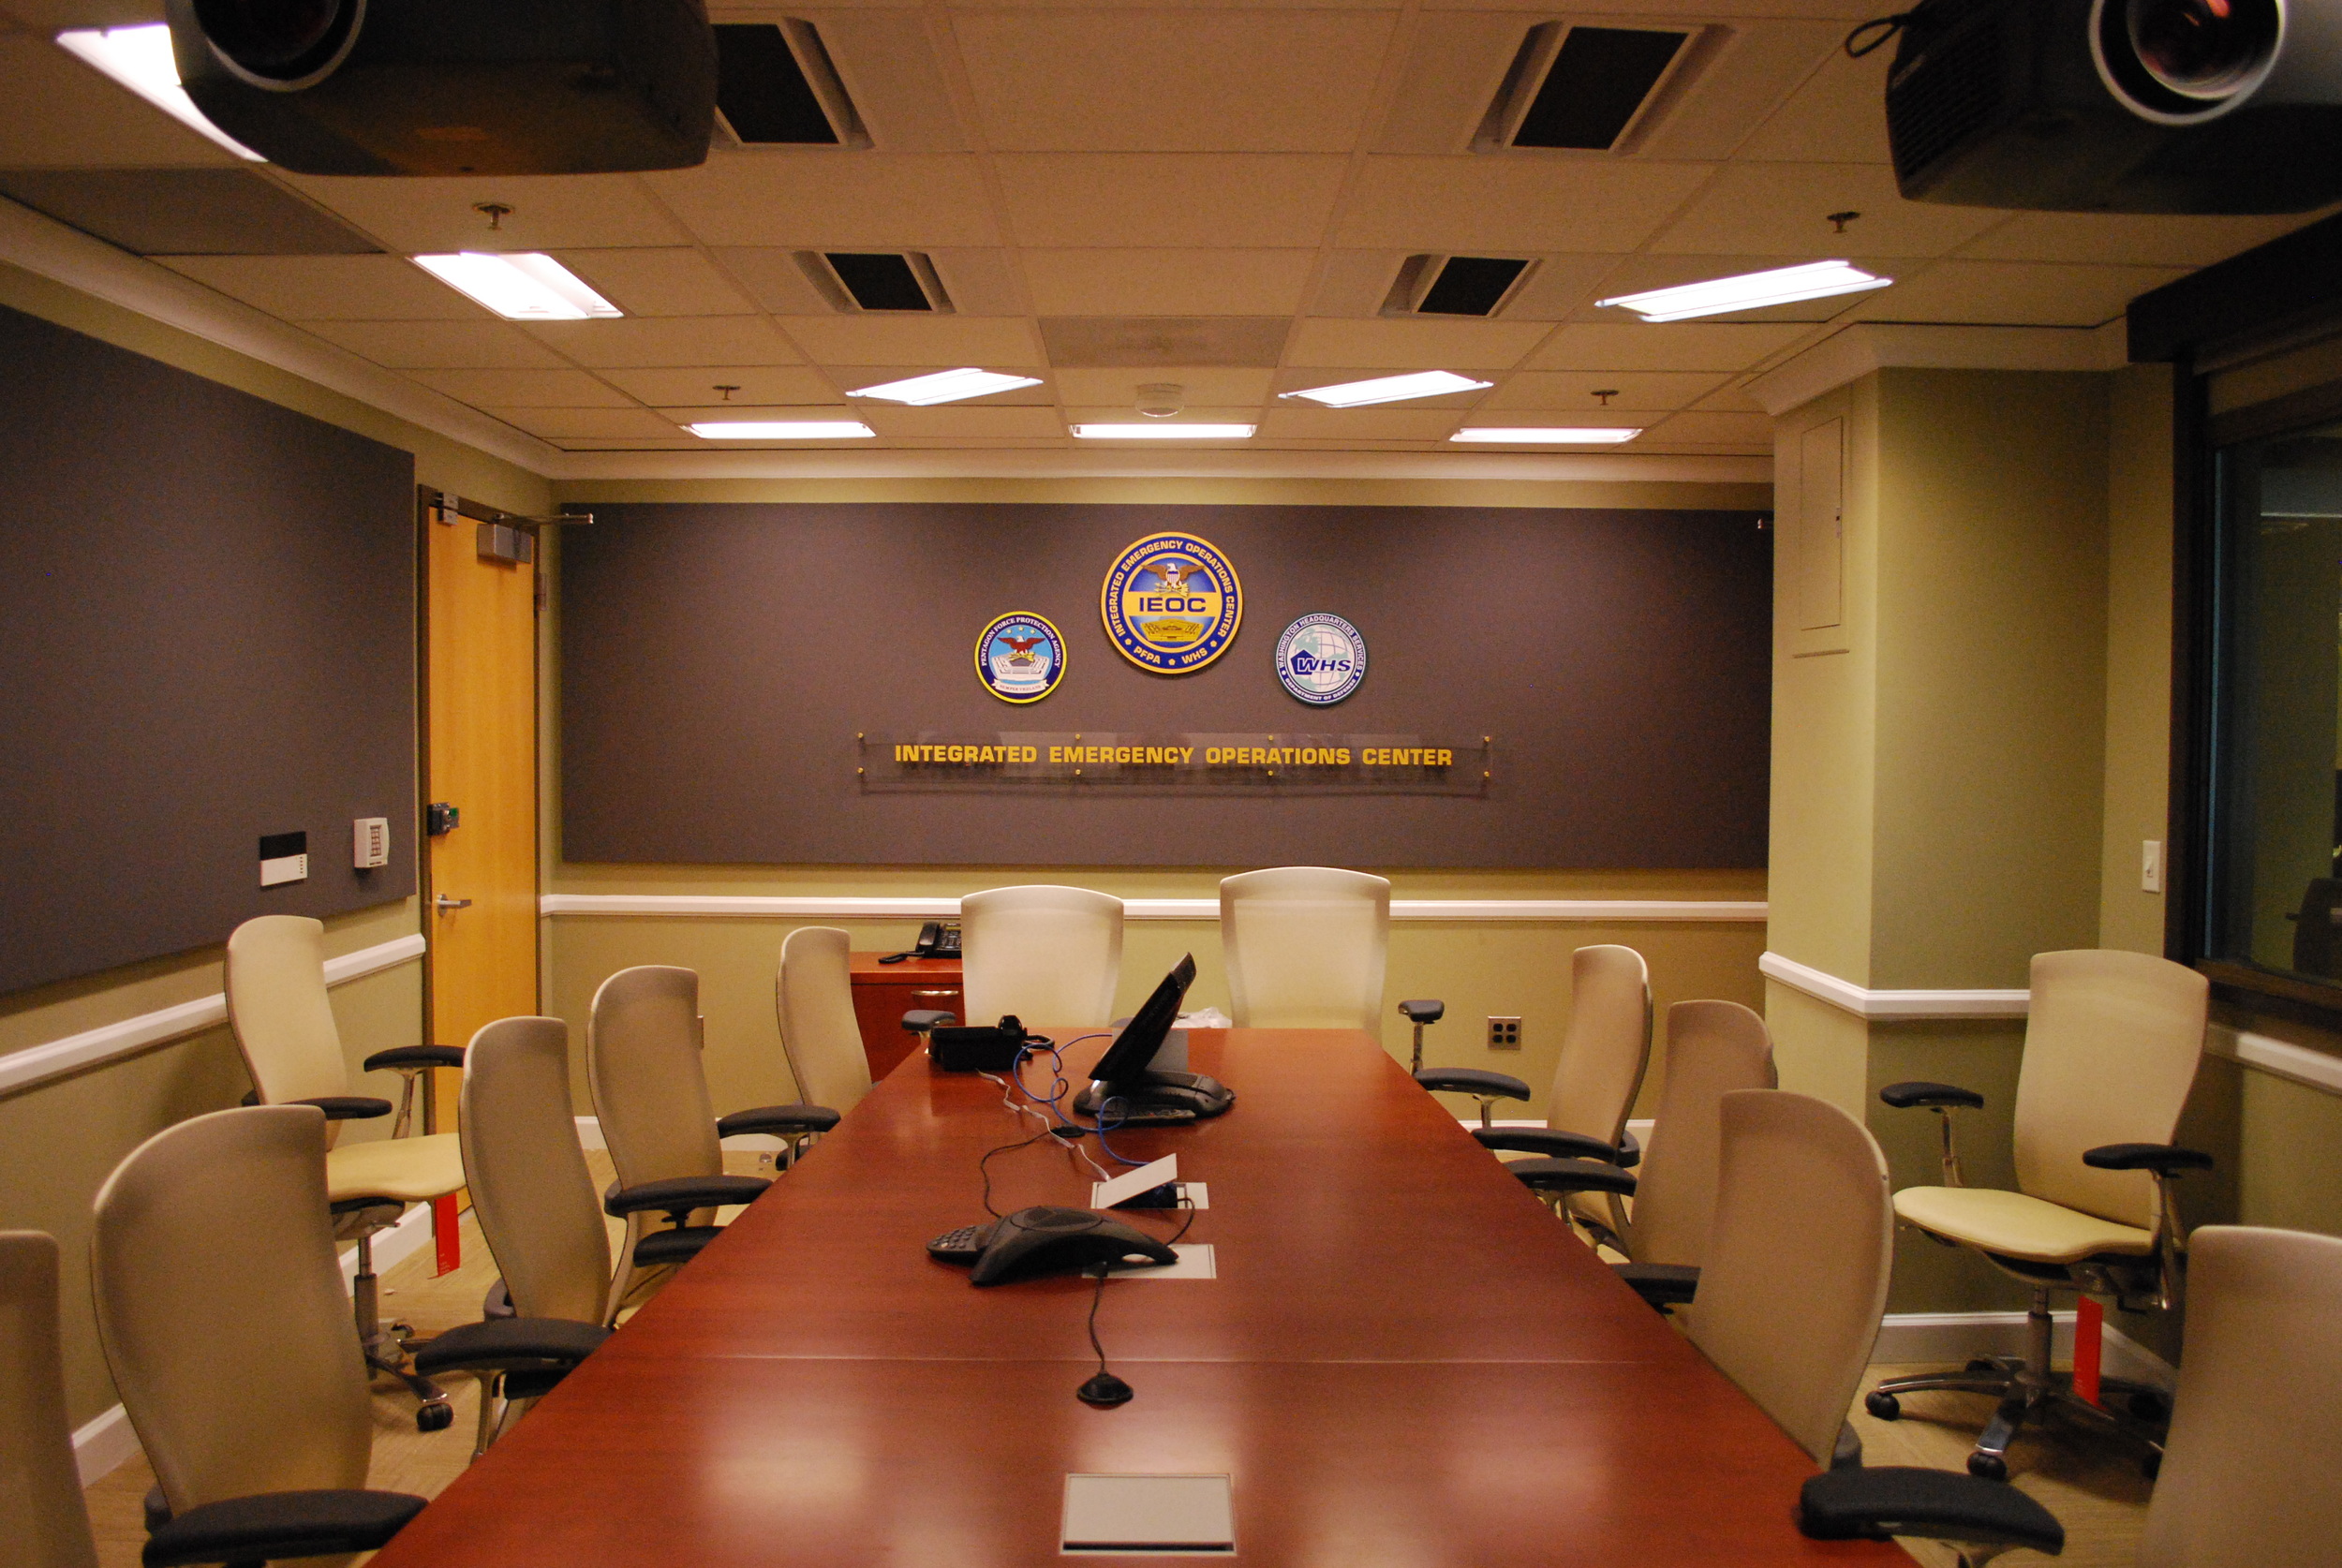 Integrated Emergency Operations Center (IEOC)